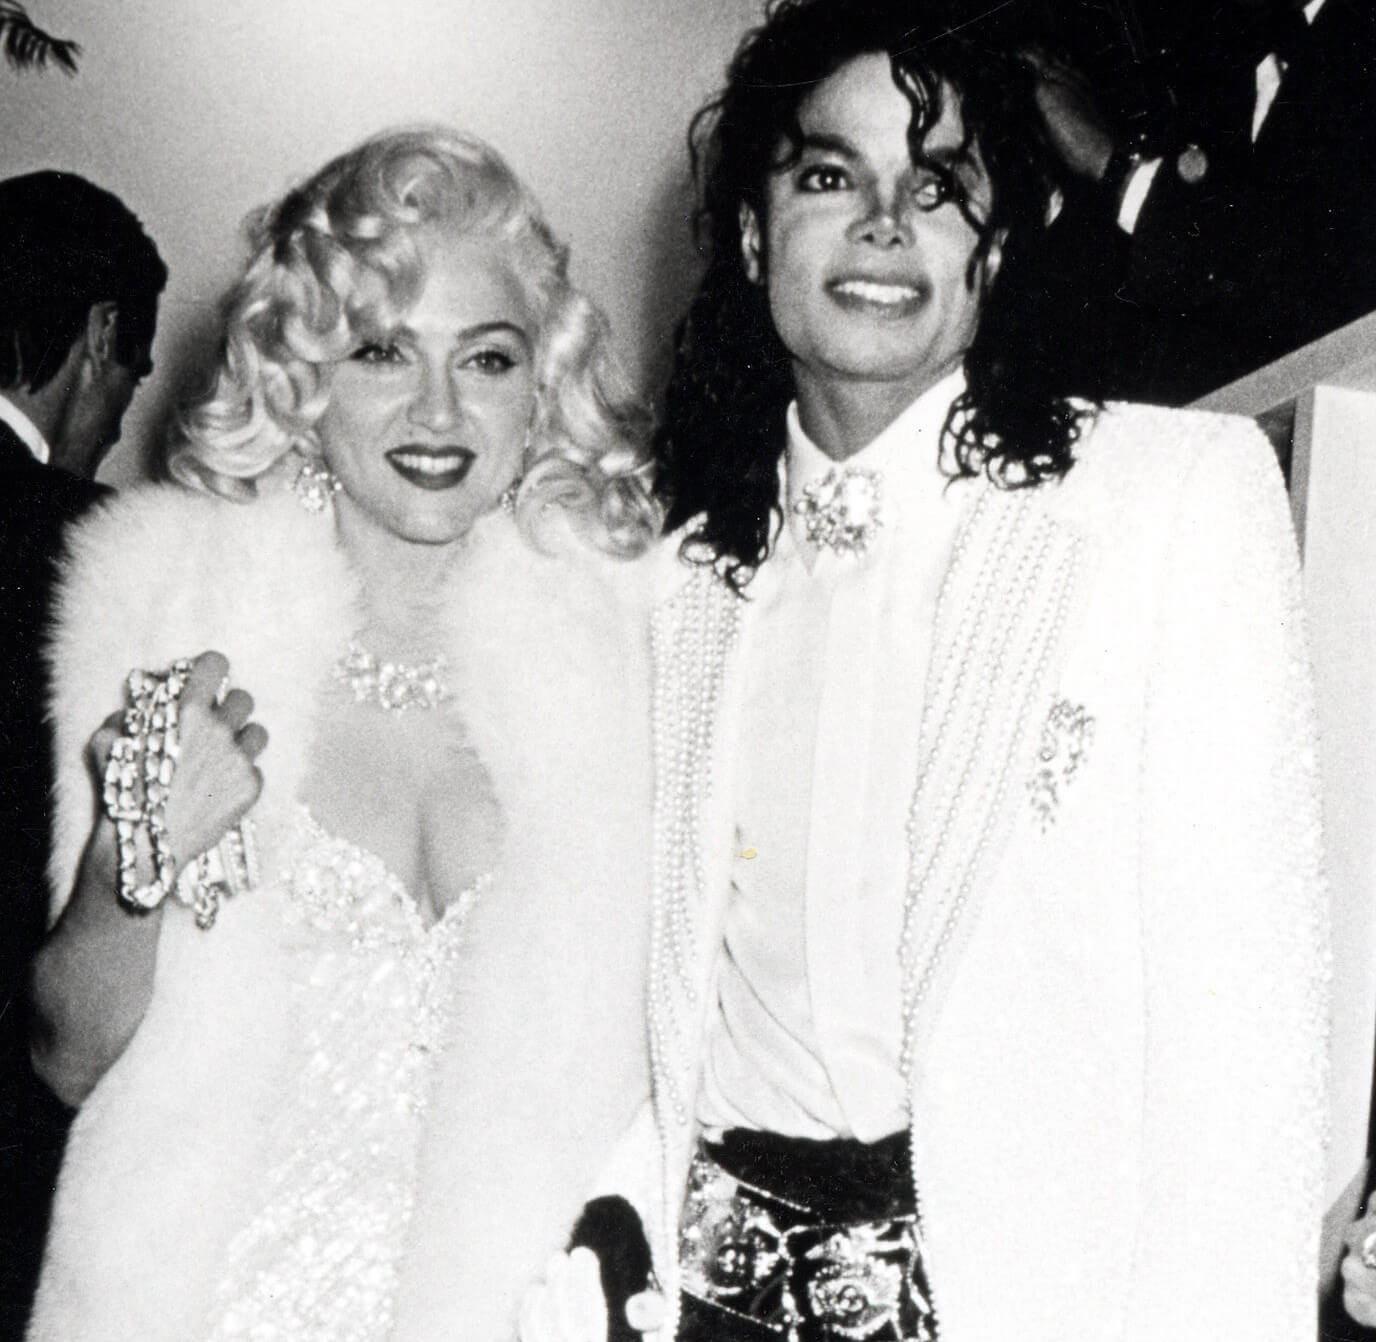 Who Has a Higher Net Worth: Madonna or Michael Jackson?